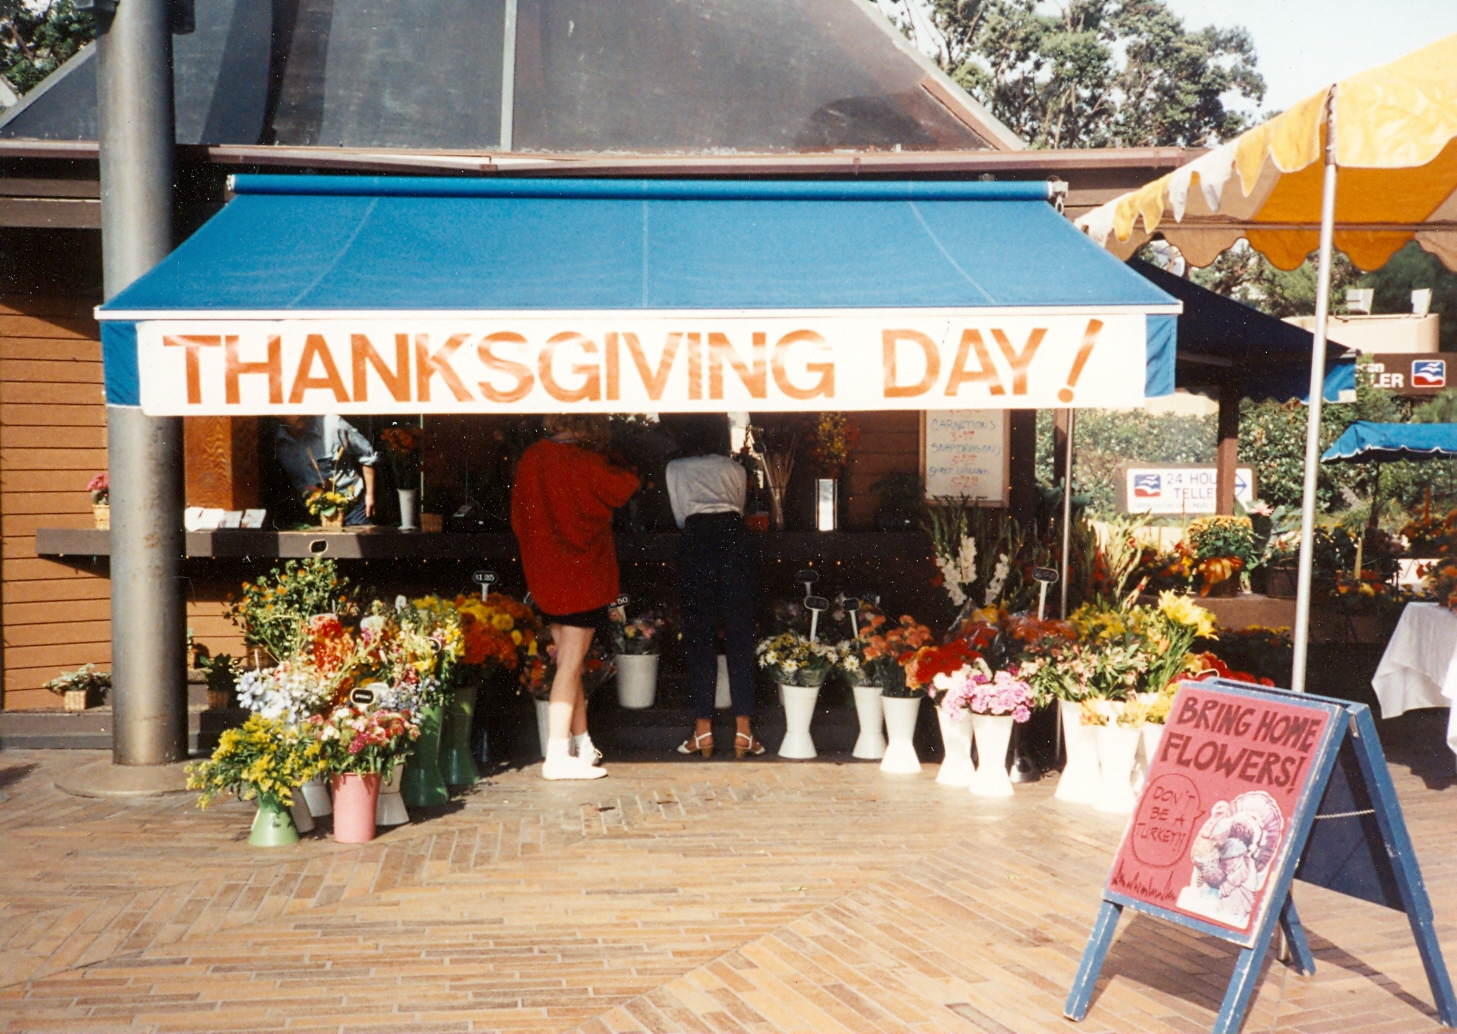 Good Earth Plant Company's original business location on a Thanksgiving nearly four decades ago! Happy Thanksgiving everyone!